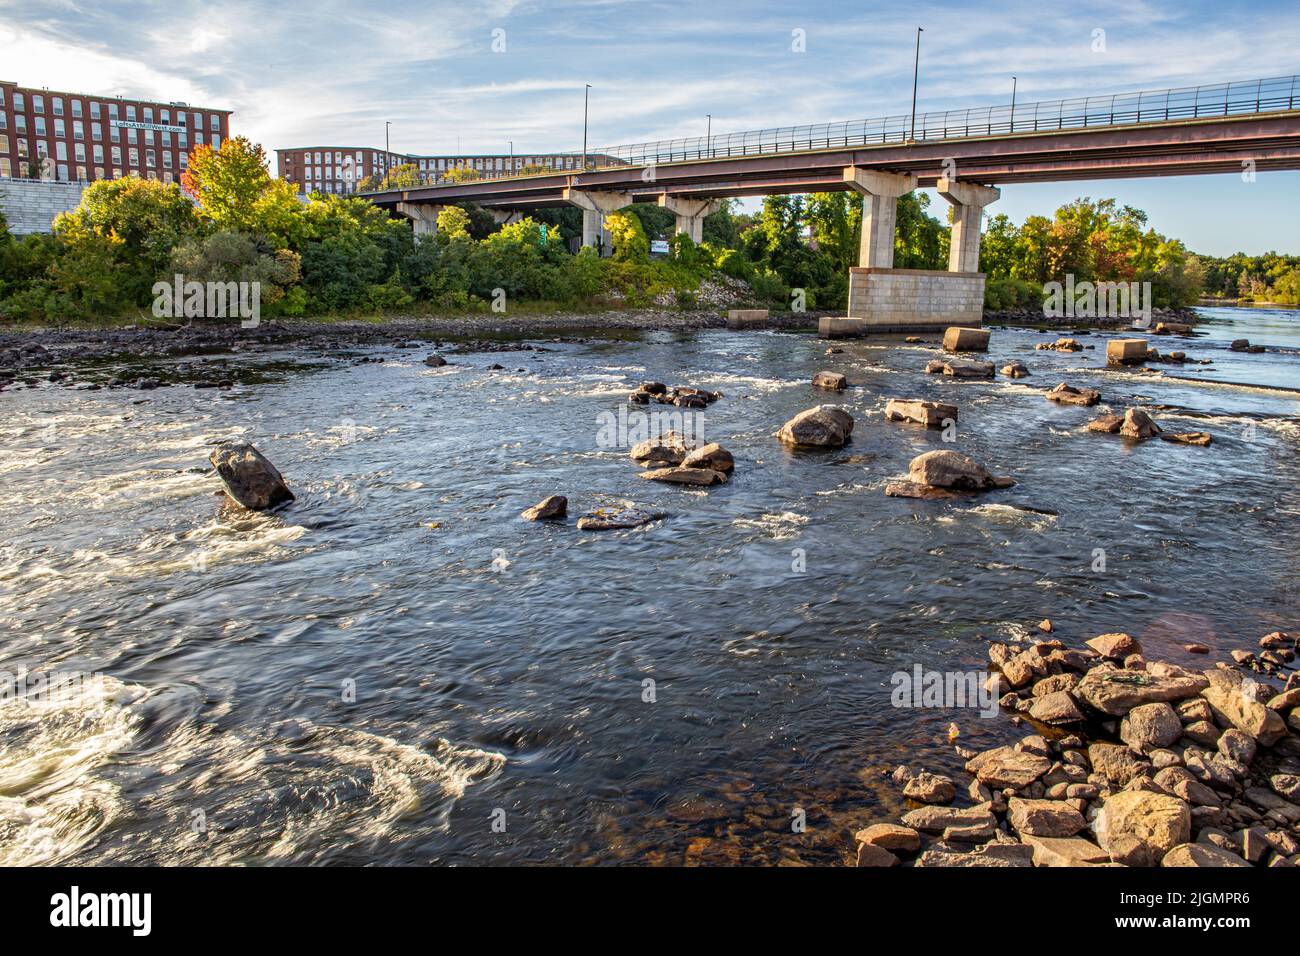 The Merrimack River flows through Manchester, New Hampshire Stock Photo